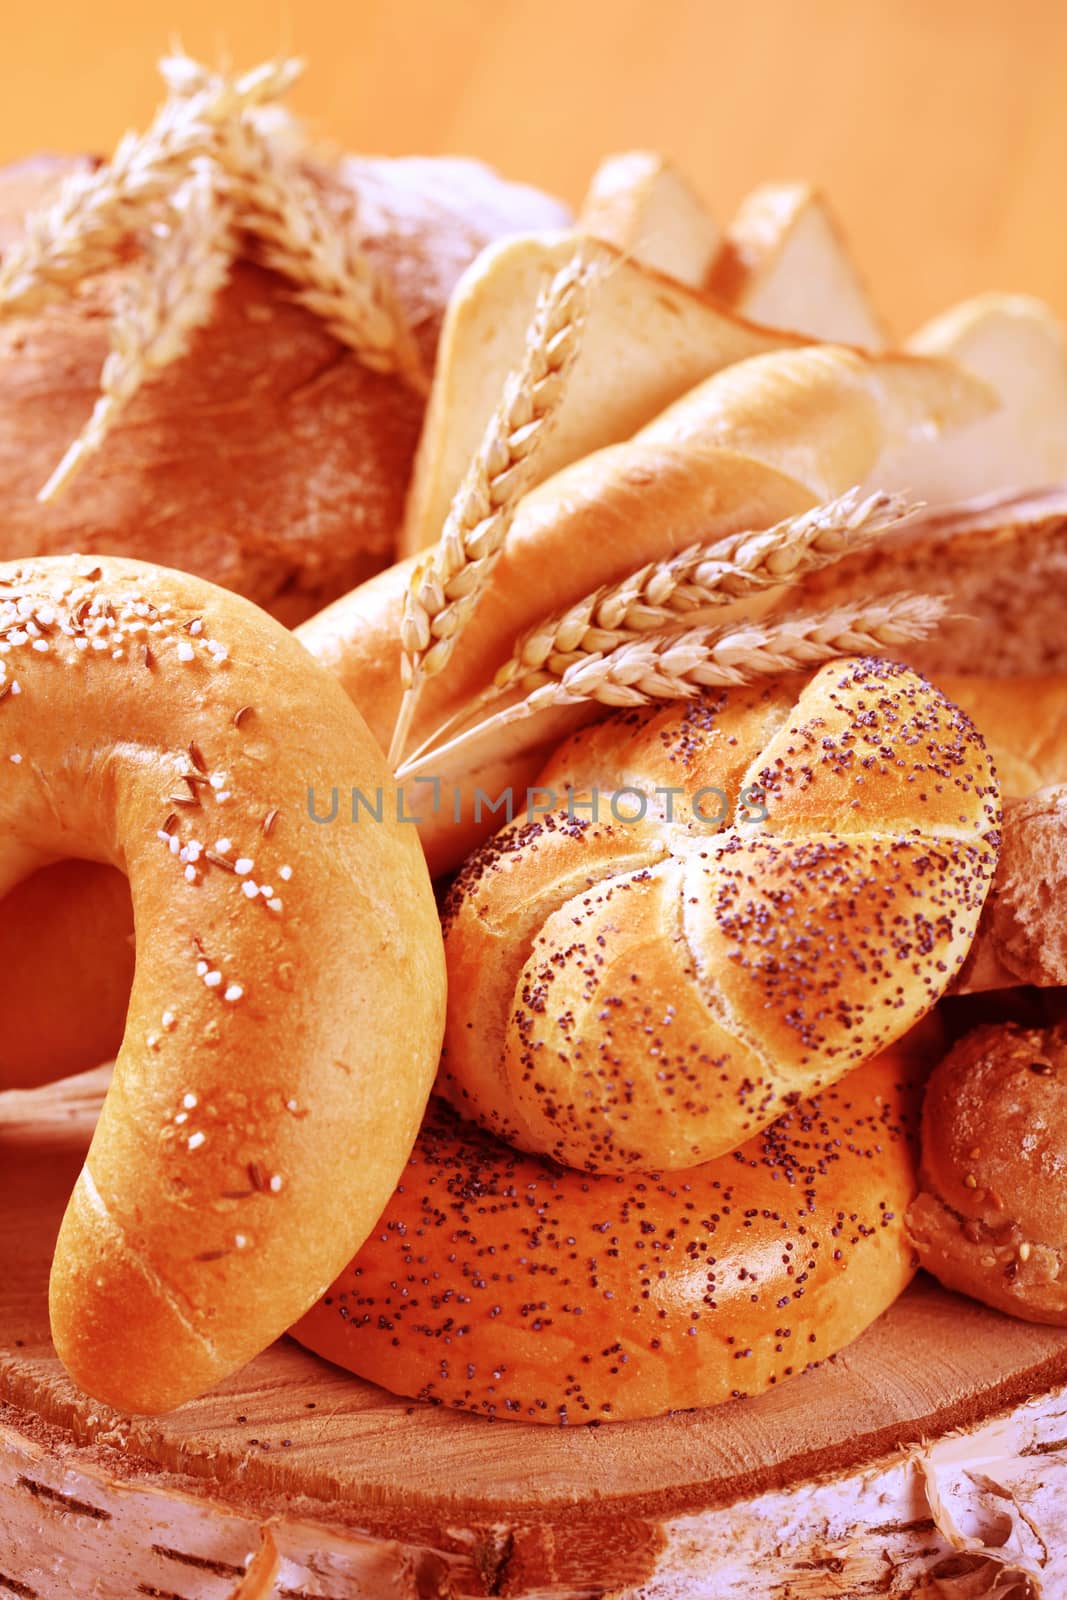 Variety of fresh bread and rolls - detail